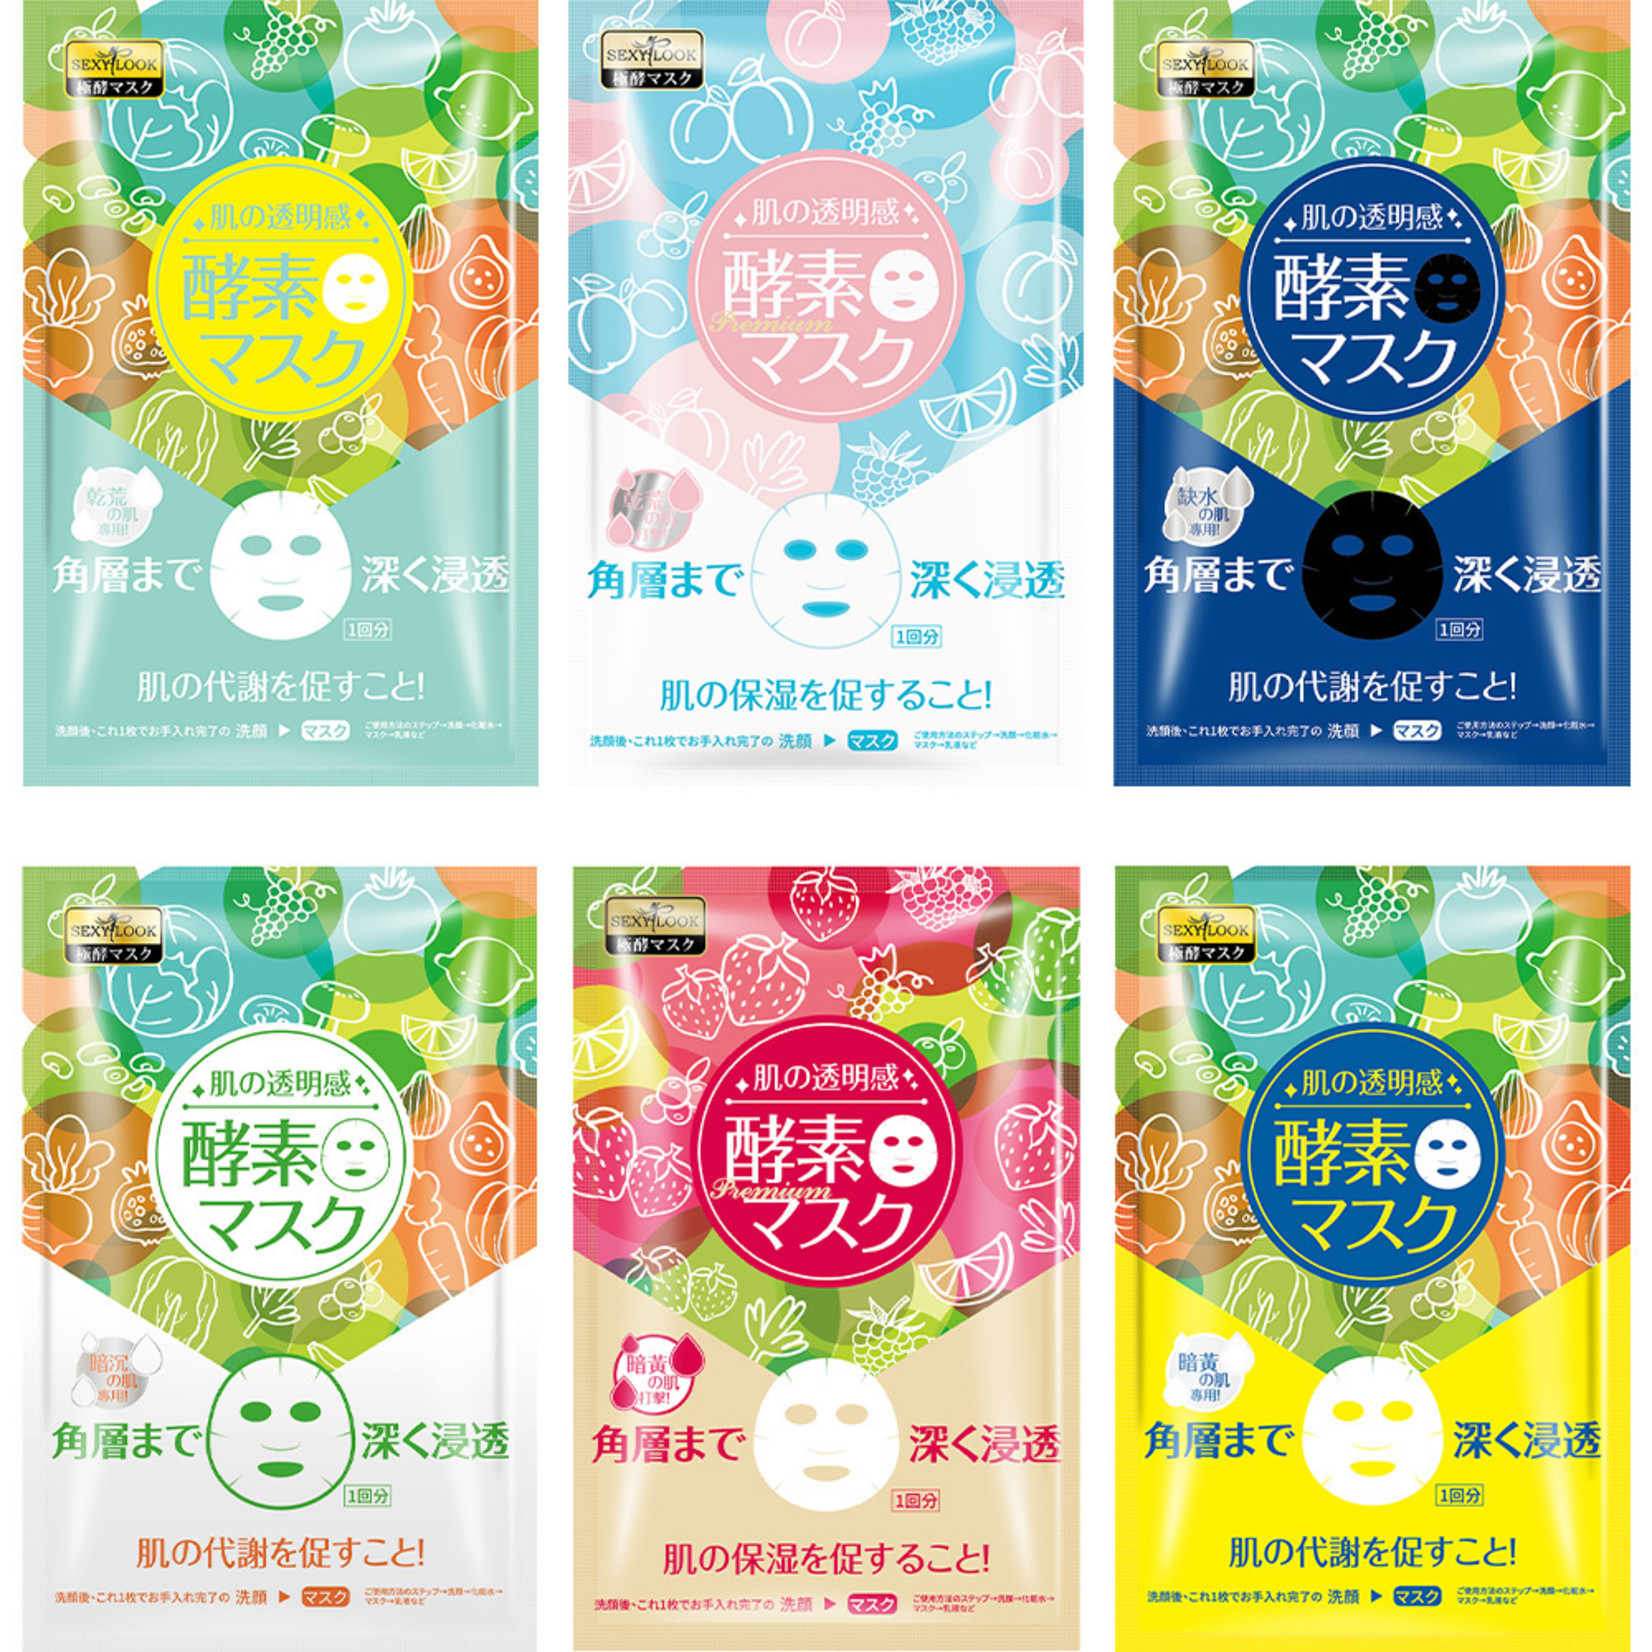 SEXYLOOK Enzyme Facial Mask Trial Mix (6 pcs)